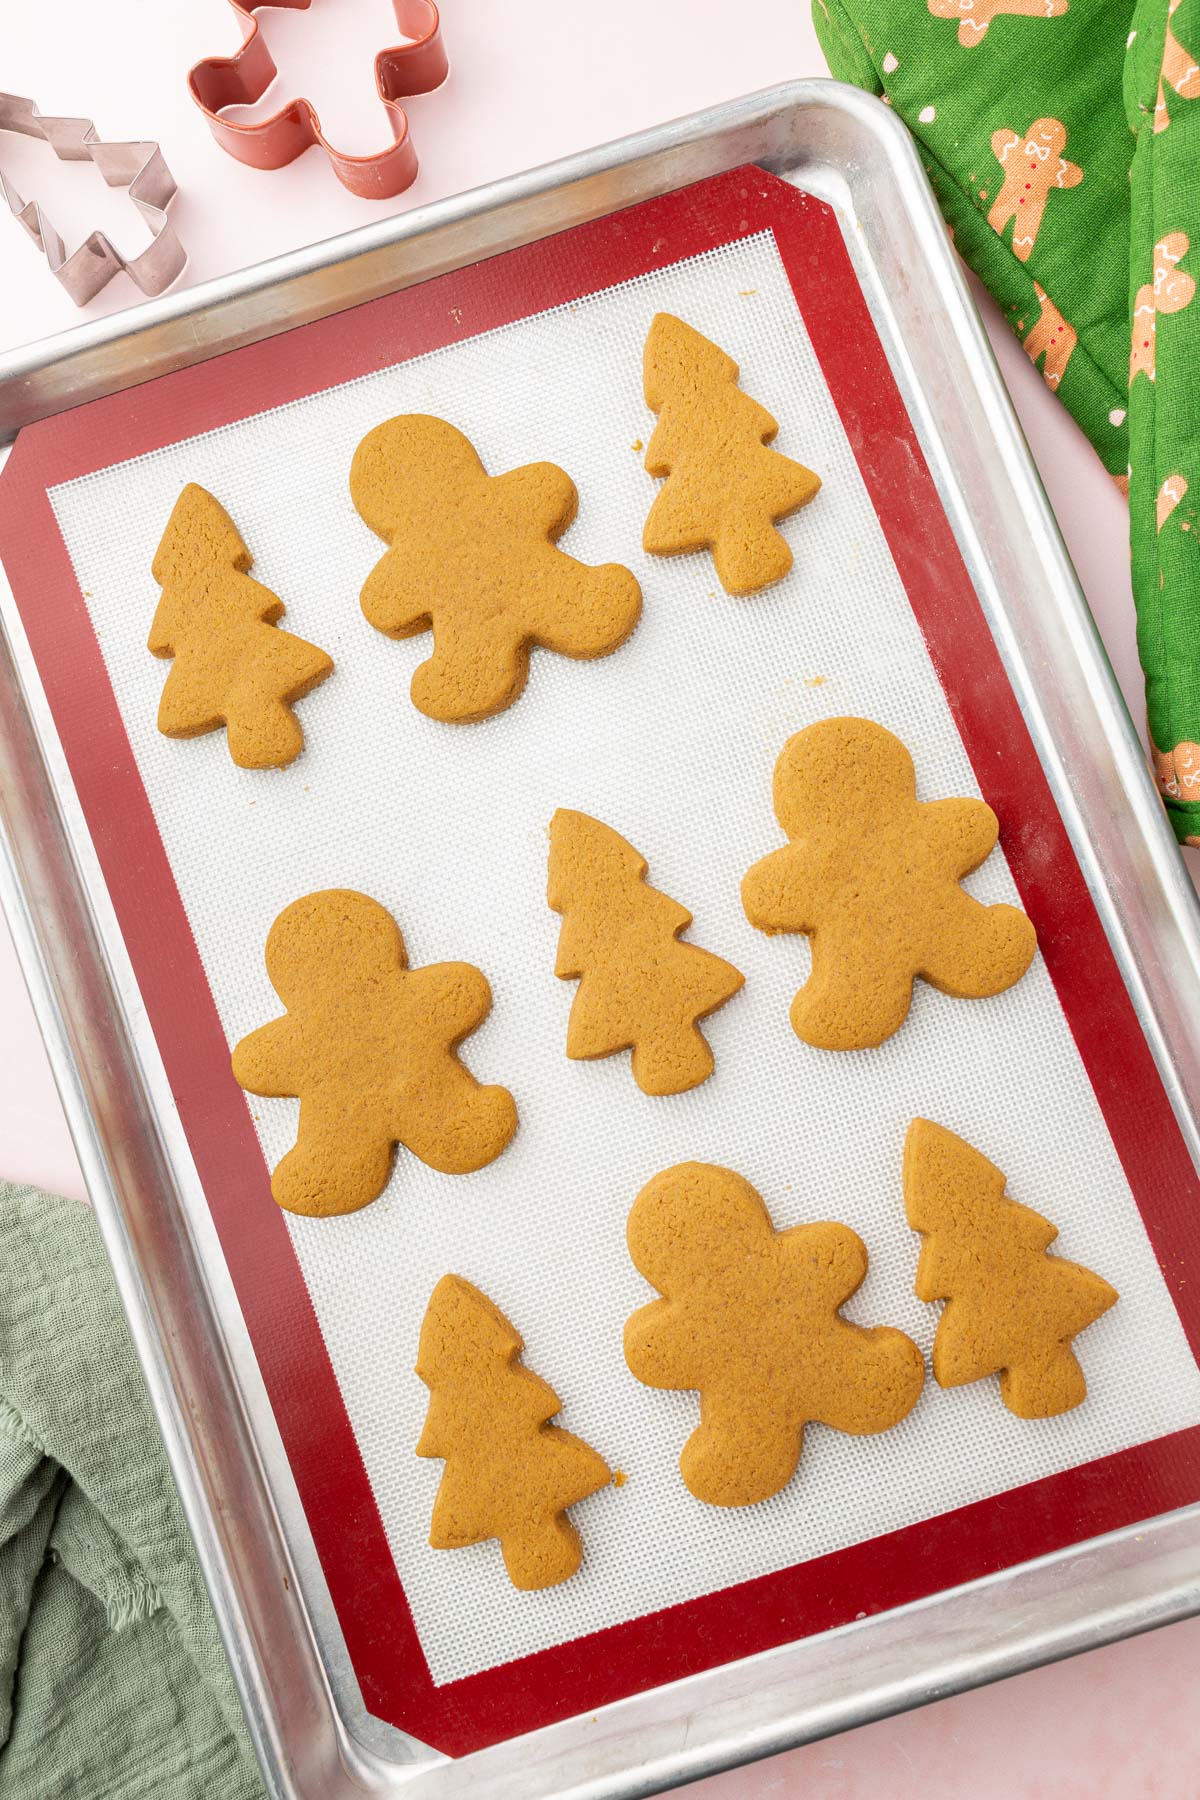 A baking sheet lined with a silicone baking mat and topped with gingerbread cookies cut out into Christmas tree and gingerbread men shapes after baking in the oven.